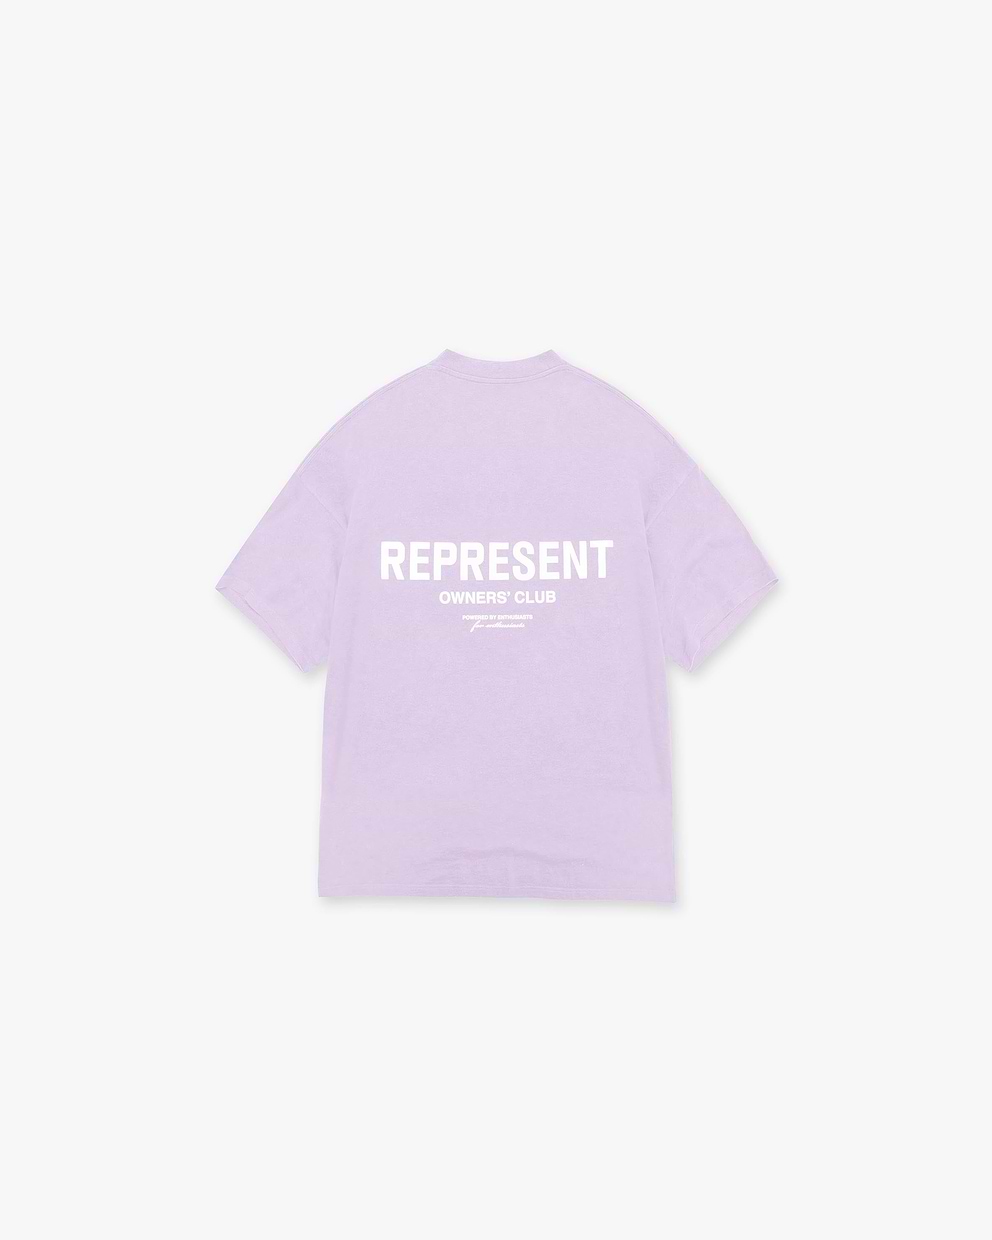 Represent Owners Club T-Shirt - Lilac